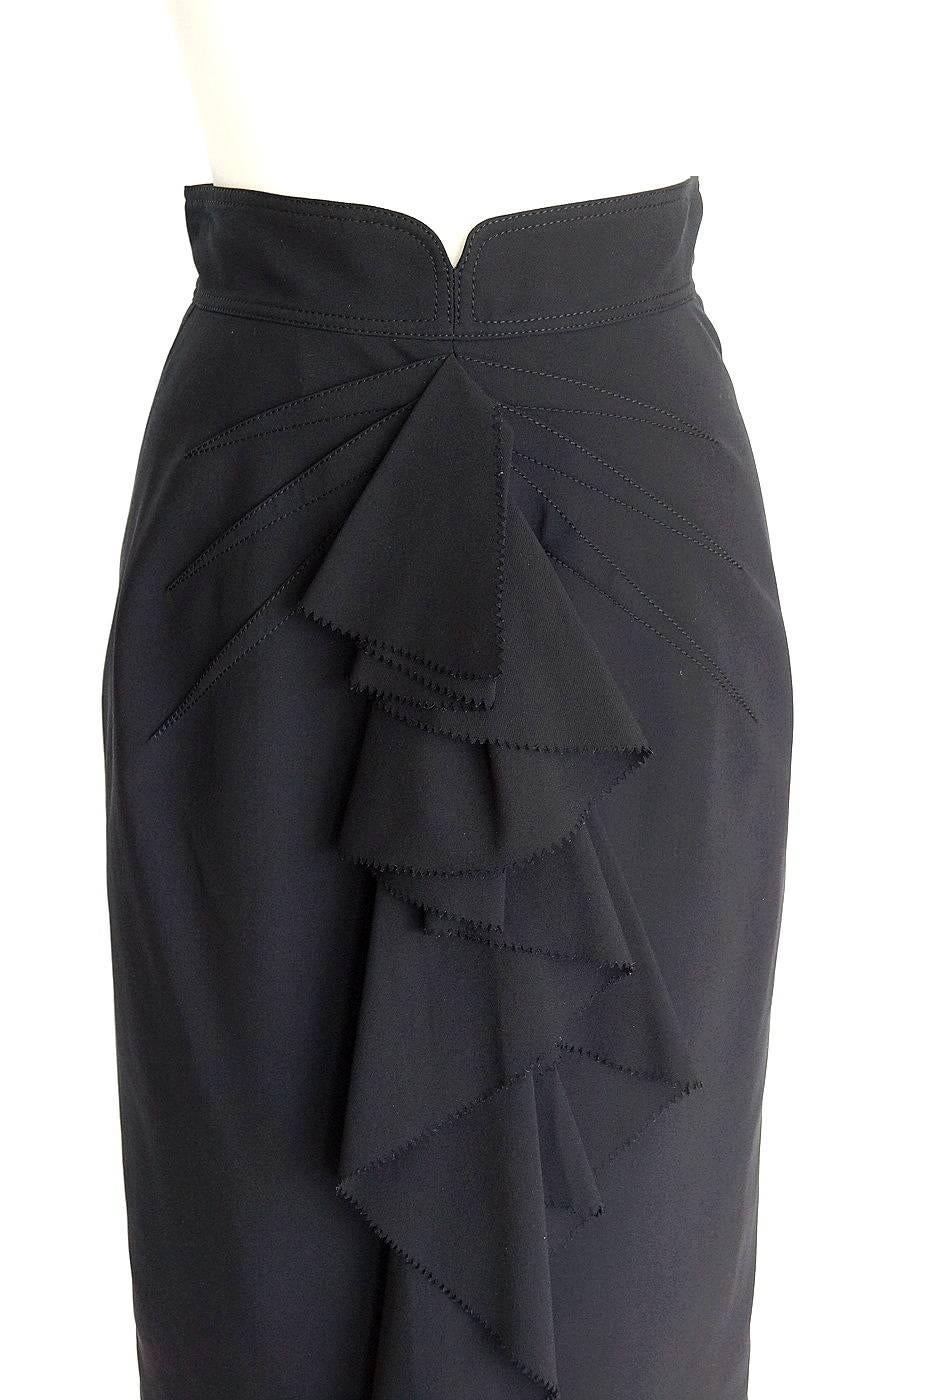 Guaranteed authentic Zac Posen pencil skirt with stitched rouching at top of front and undulating ruffle from waist to hem.
Ruffle has a ric rac edge. Accentuating stitch detail.
Lovely shaped waistband with hidden rear zipper.
Skirt is silk with